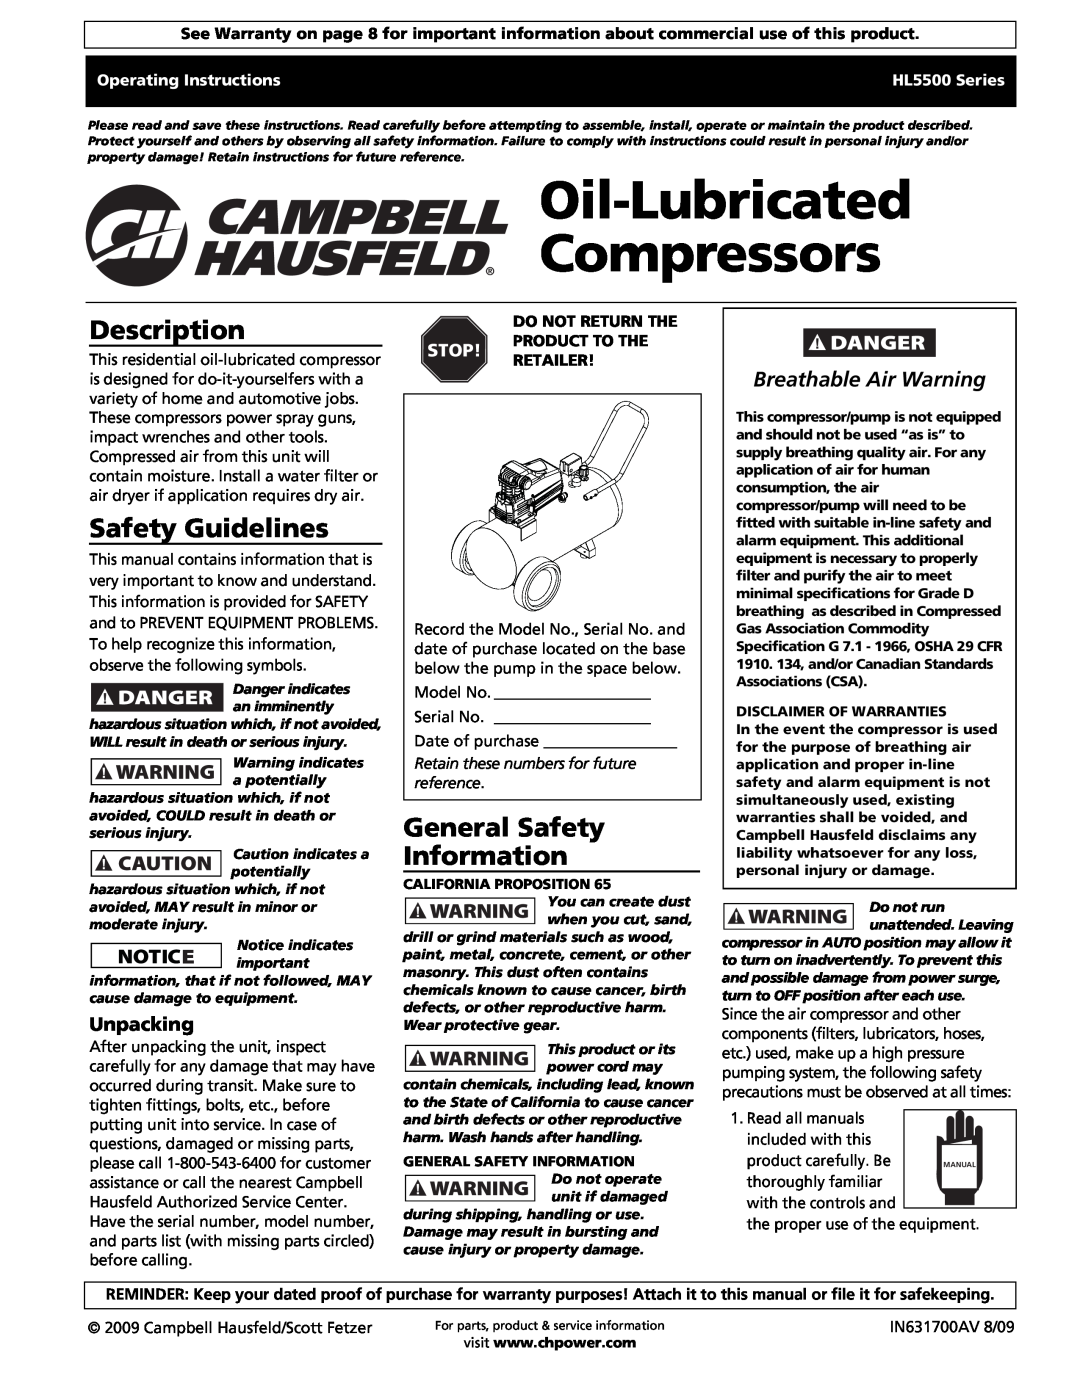 Campbell Hausfeld HS5500 operating instructions Oil-Lubricated Compressors, Description, Safety Guidelines, Unpacking 